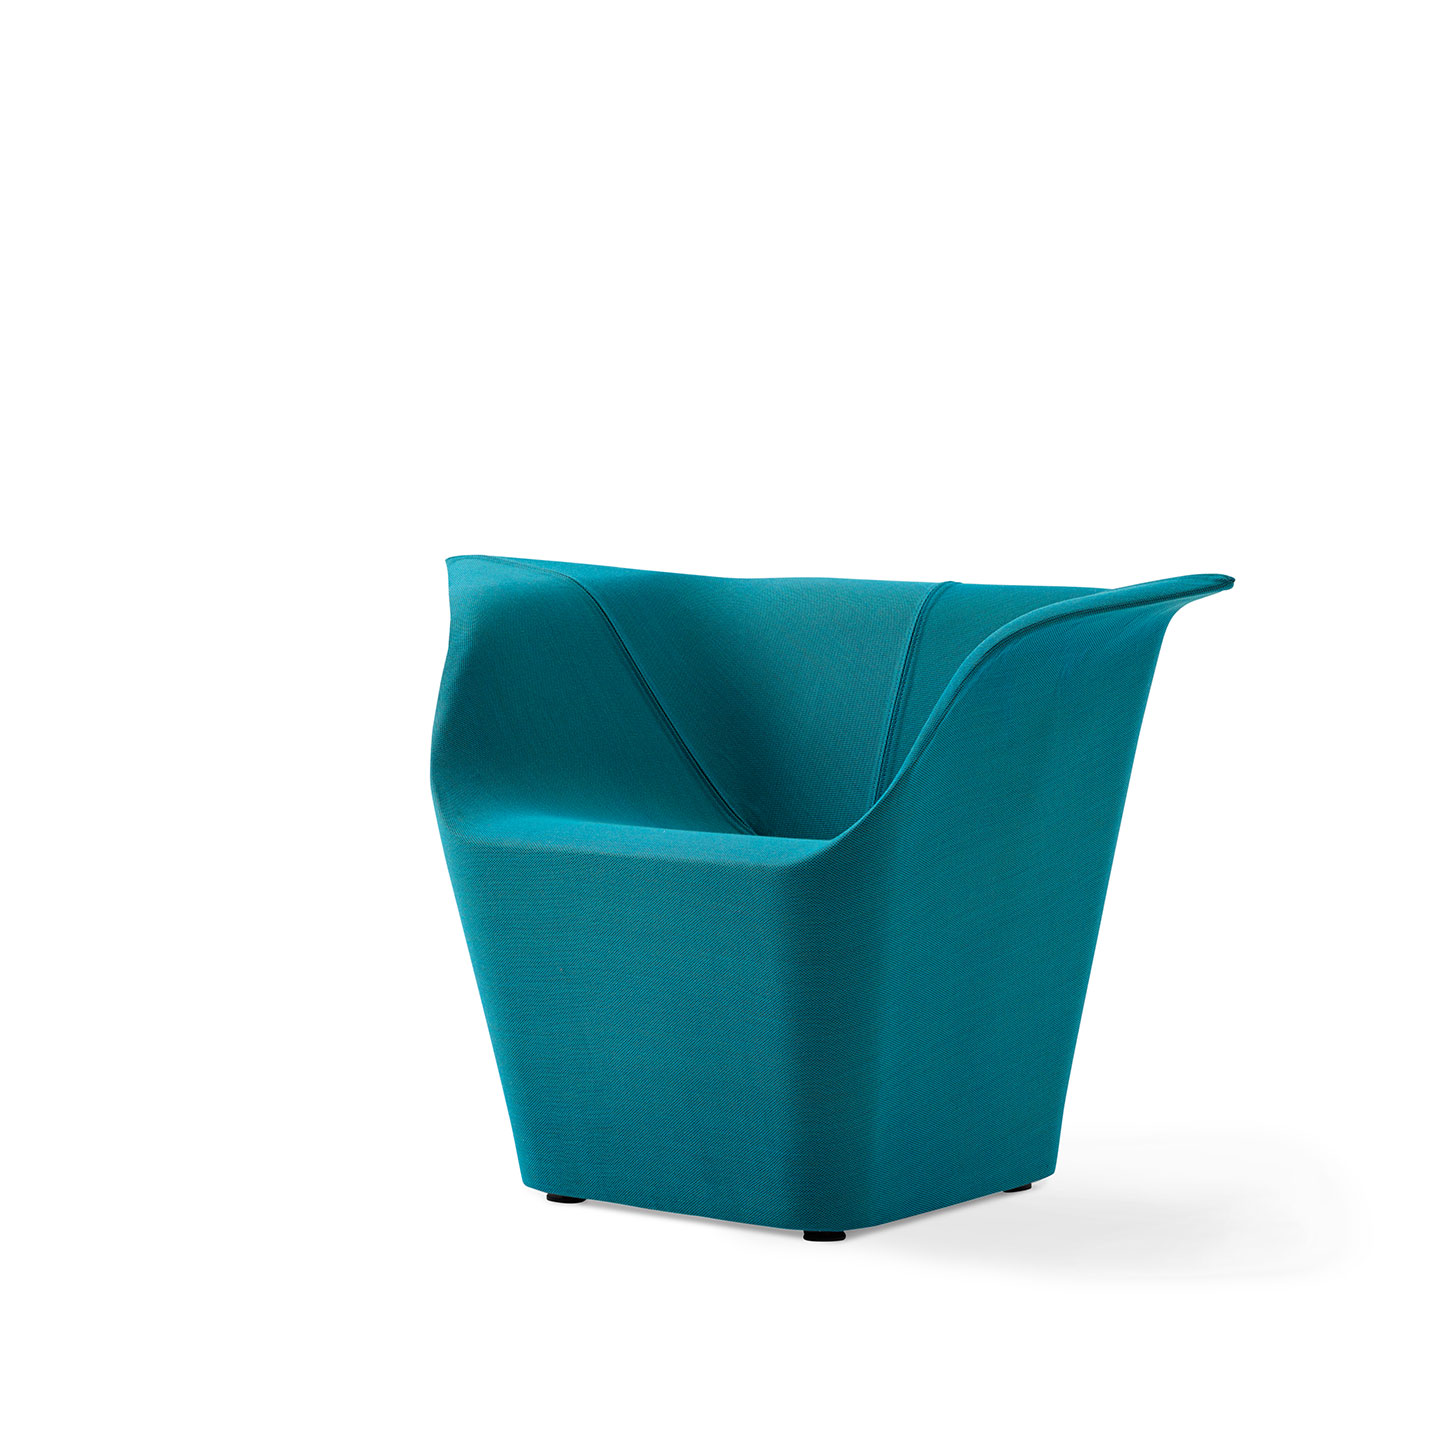 Haworth Garment lounge chair in teal color